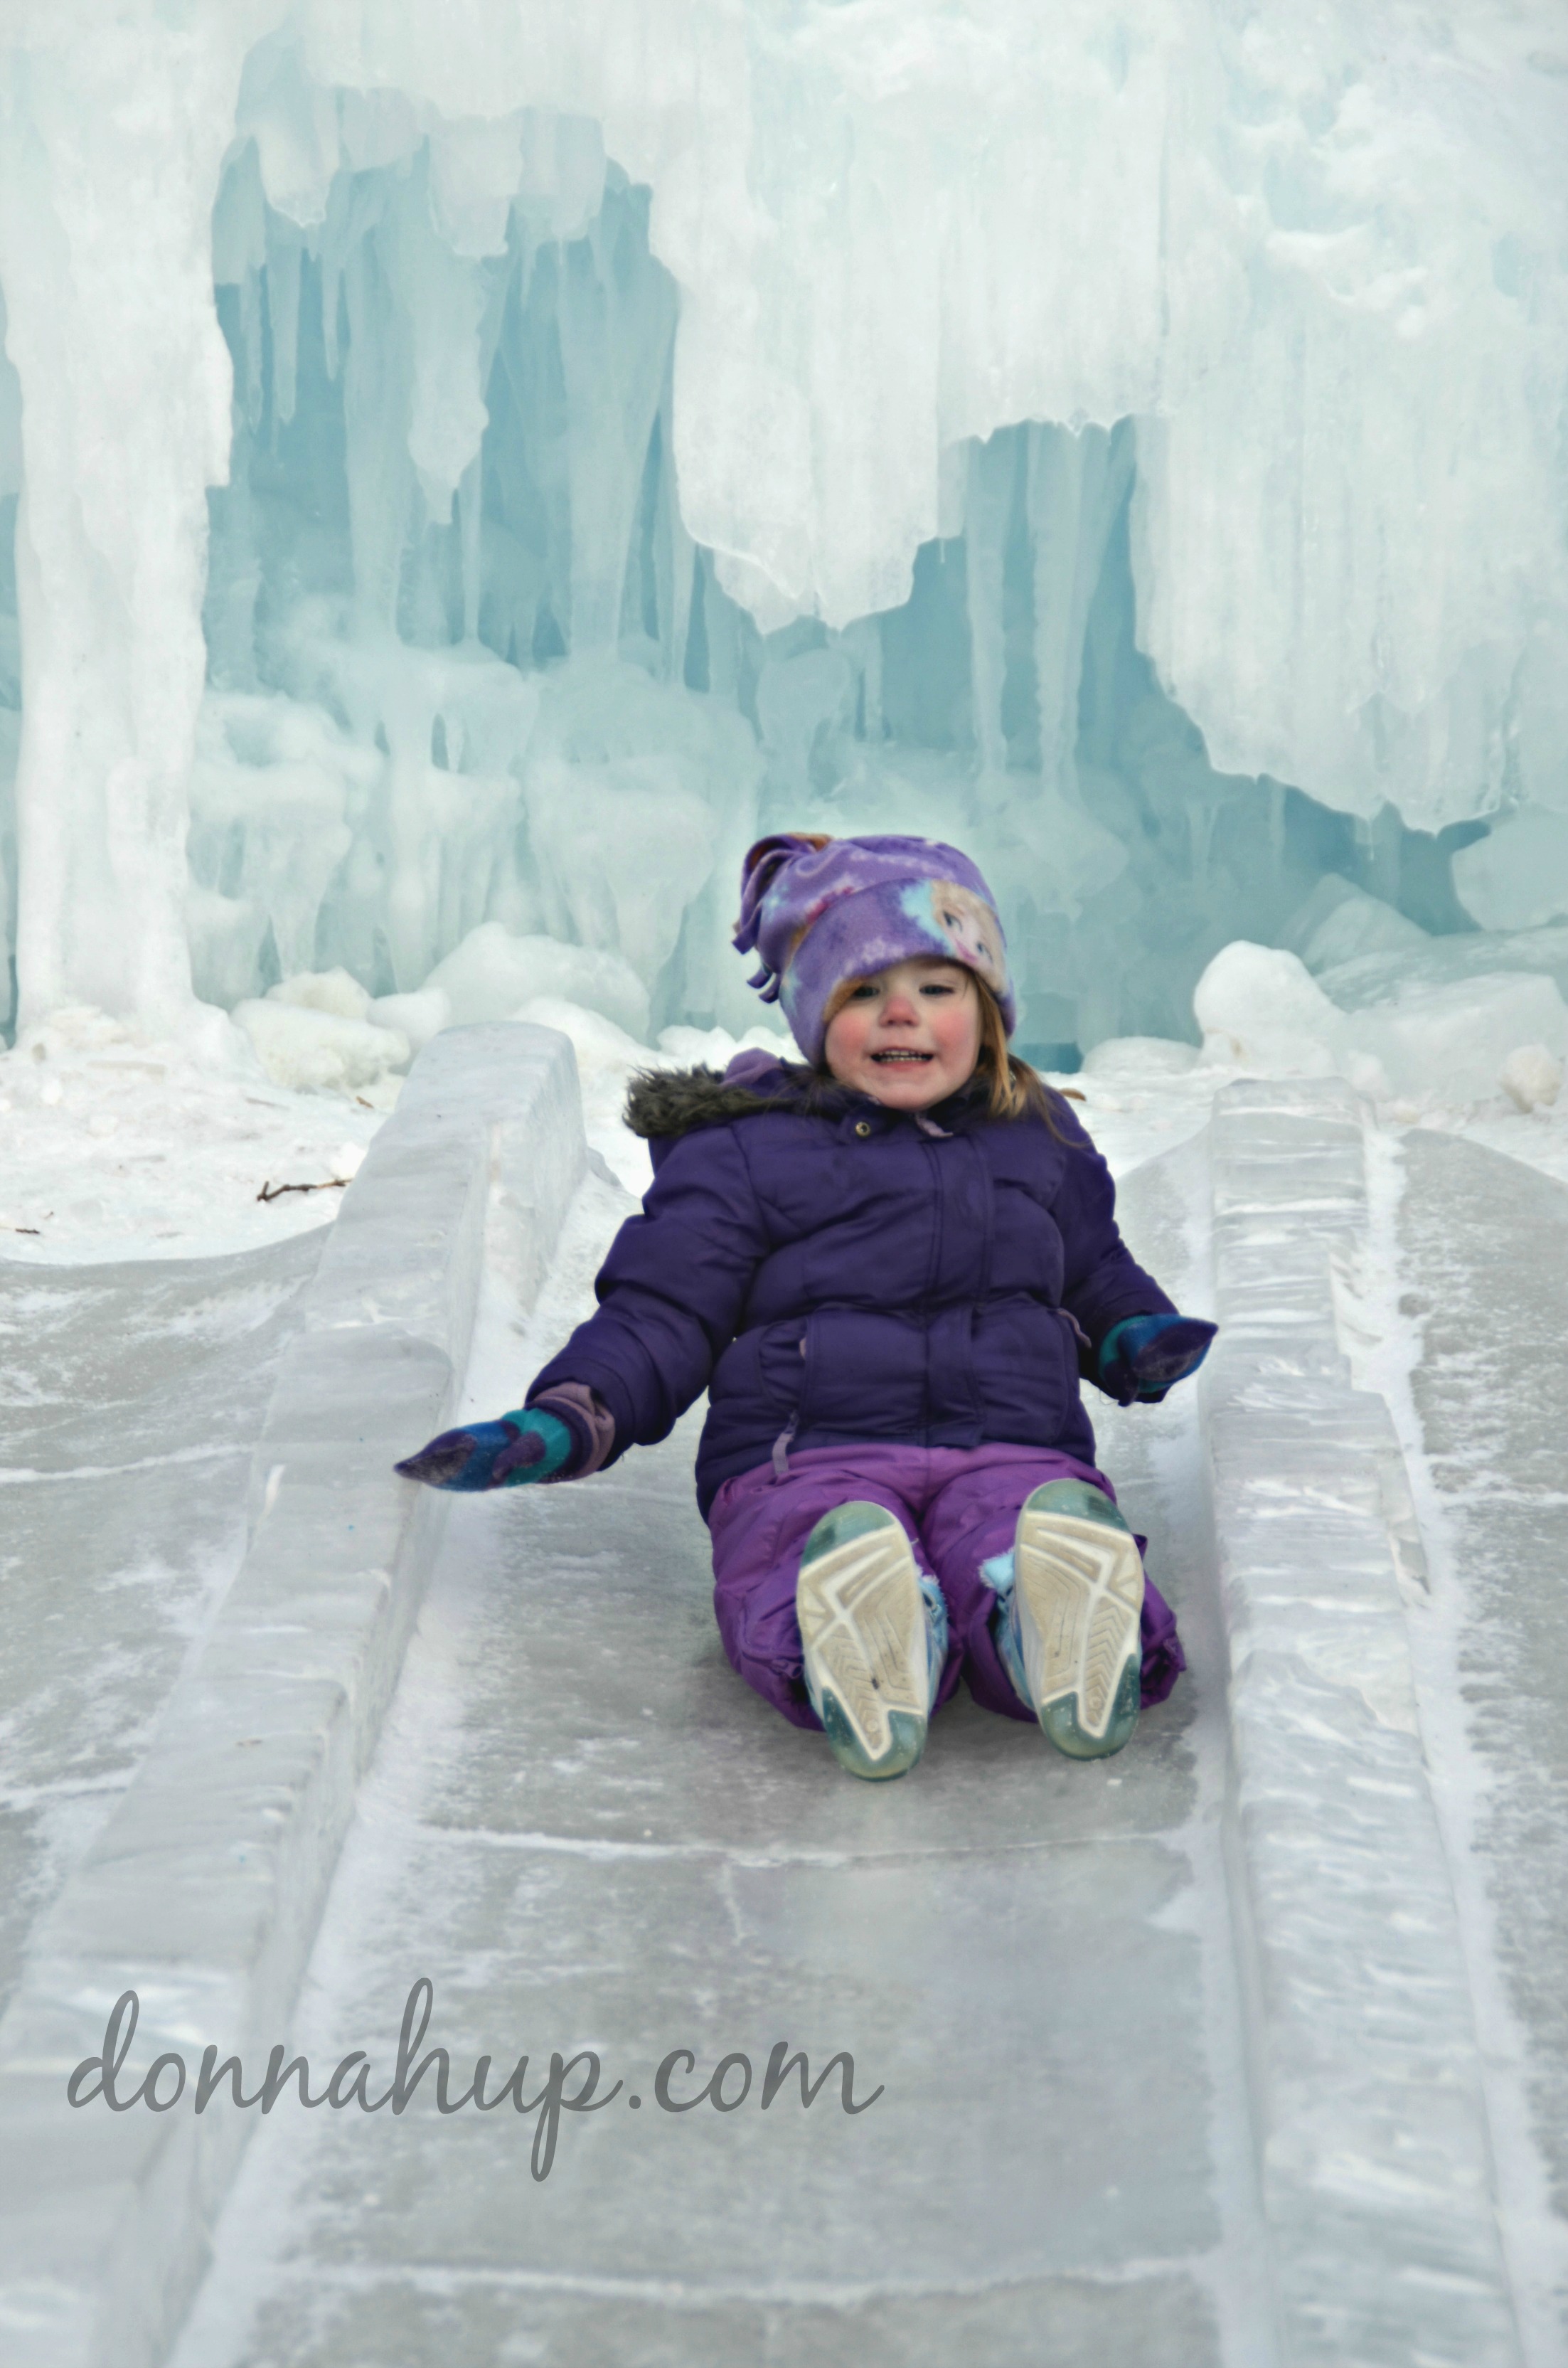 Spending the day at the Ice Castles